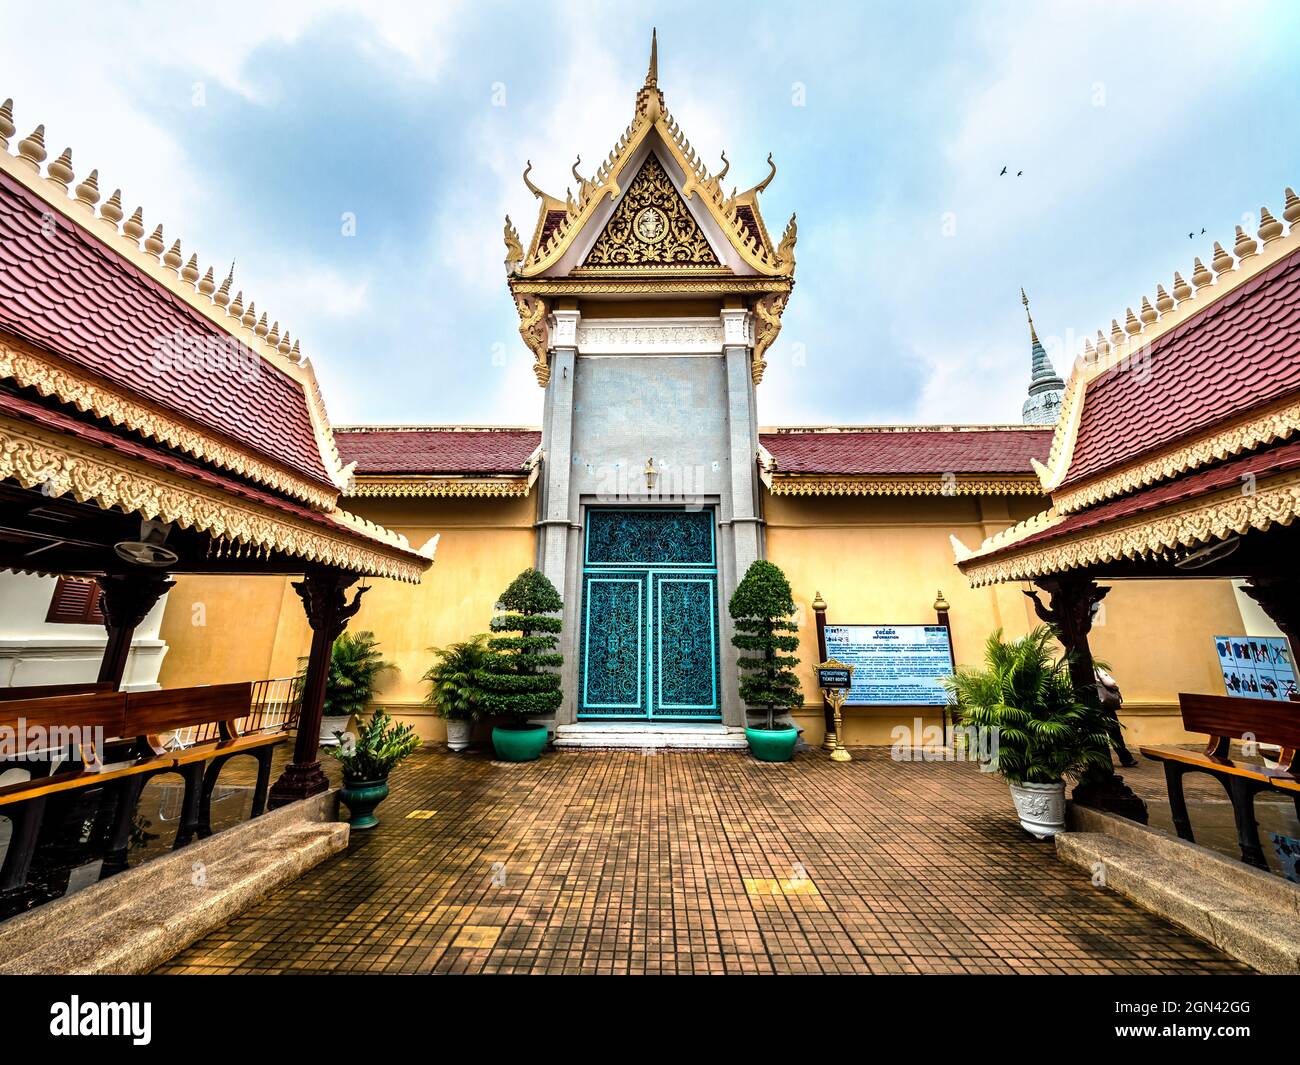 Phnom Penh, Cambodia, Asia - November 13, 2019: Interior garden of the Royal Palace built in Mongolian style architecture Stock Photo